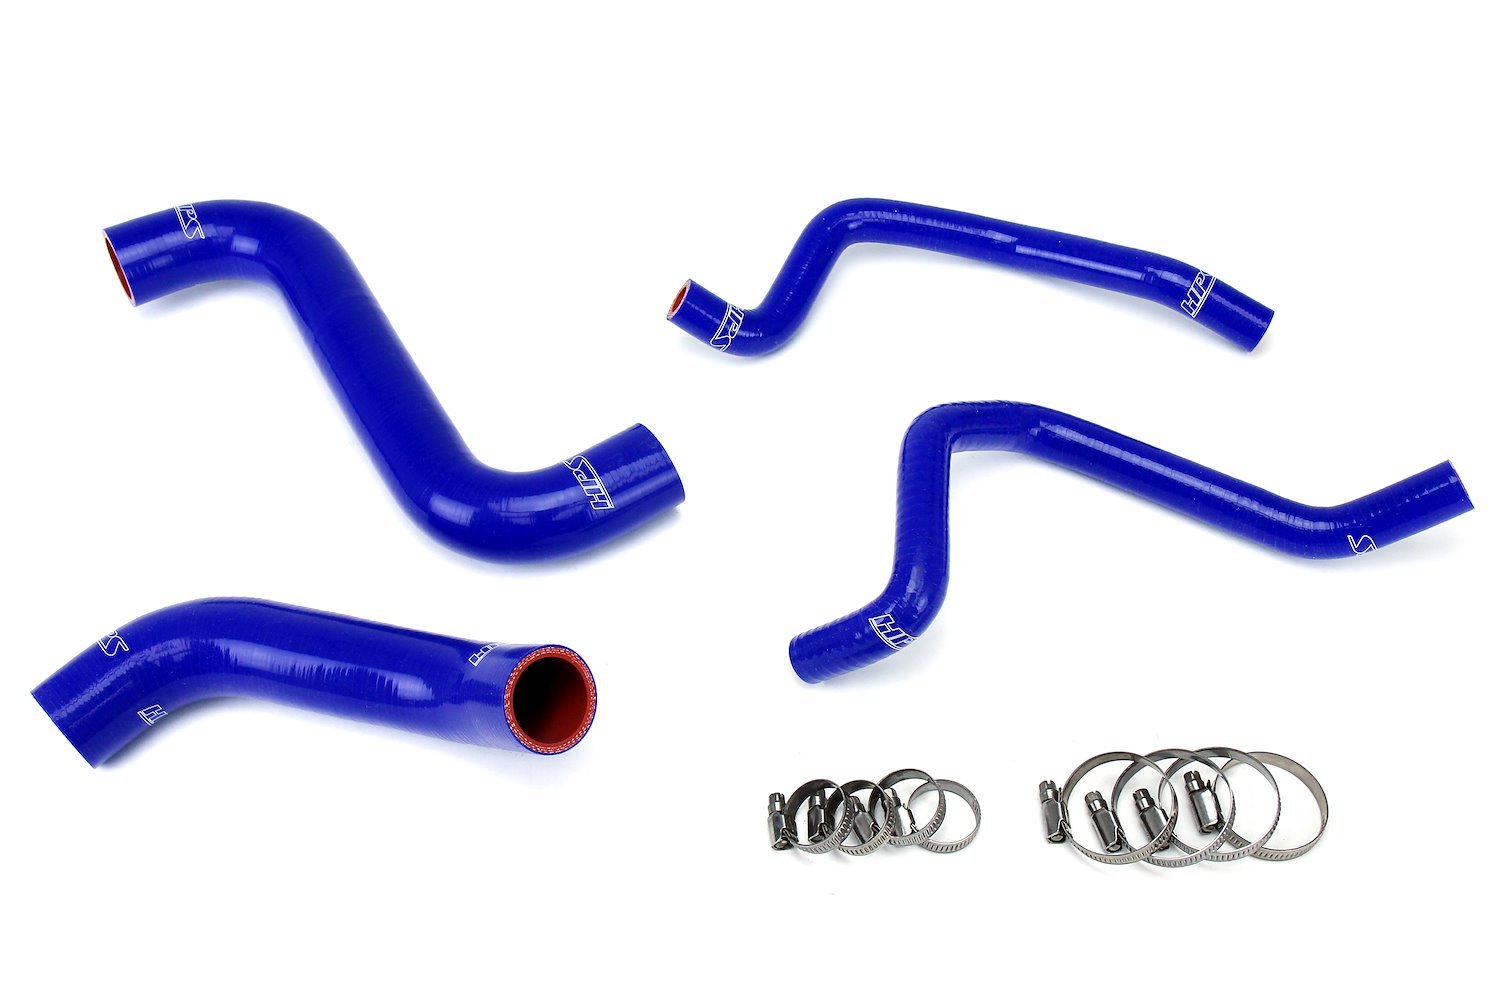 57-1810-BLUE Radiator and Heater Hose Kit, 3-Ply Reinforced Silicone, Replaces Rubber Radiator & Heater Coolant Hoses